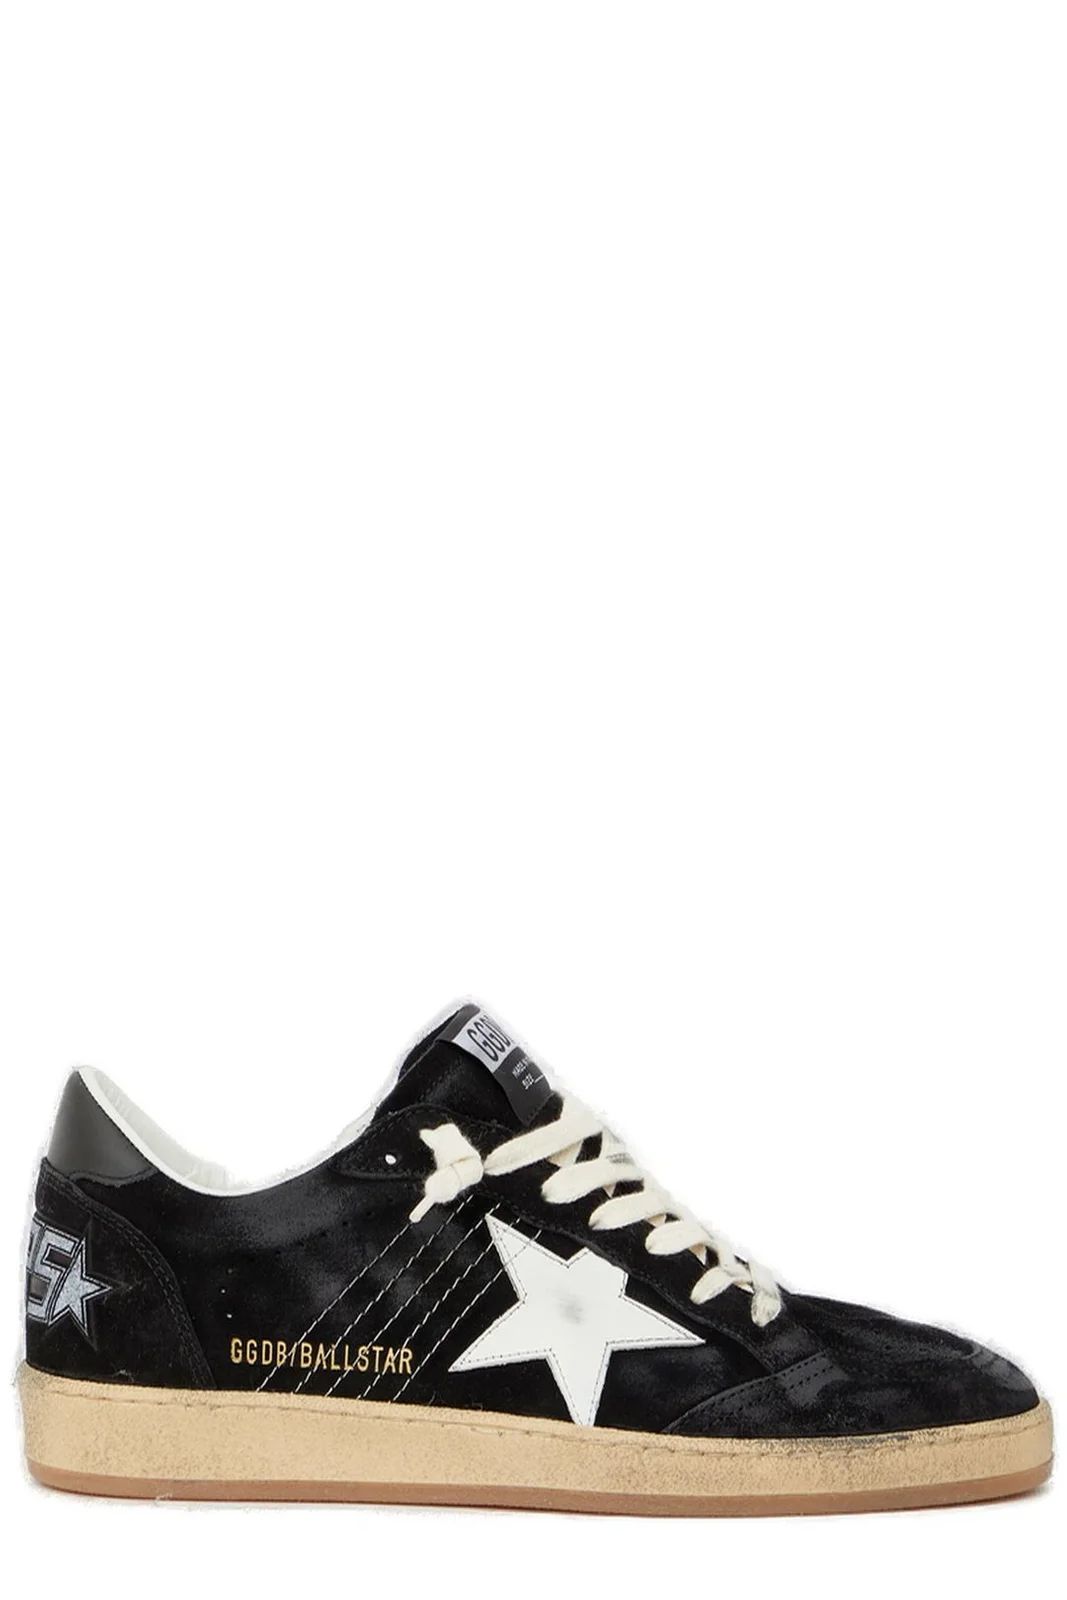 Golden Goose Deluxe Brand Vintage Effect Ball Star Sneakers | Cettire Global